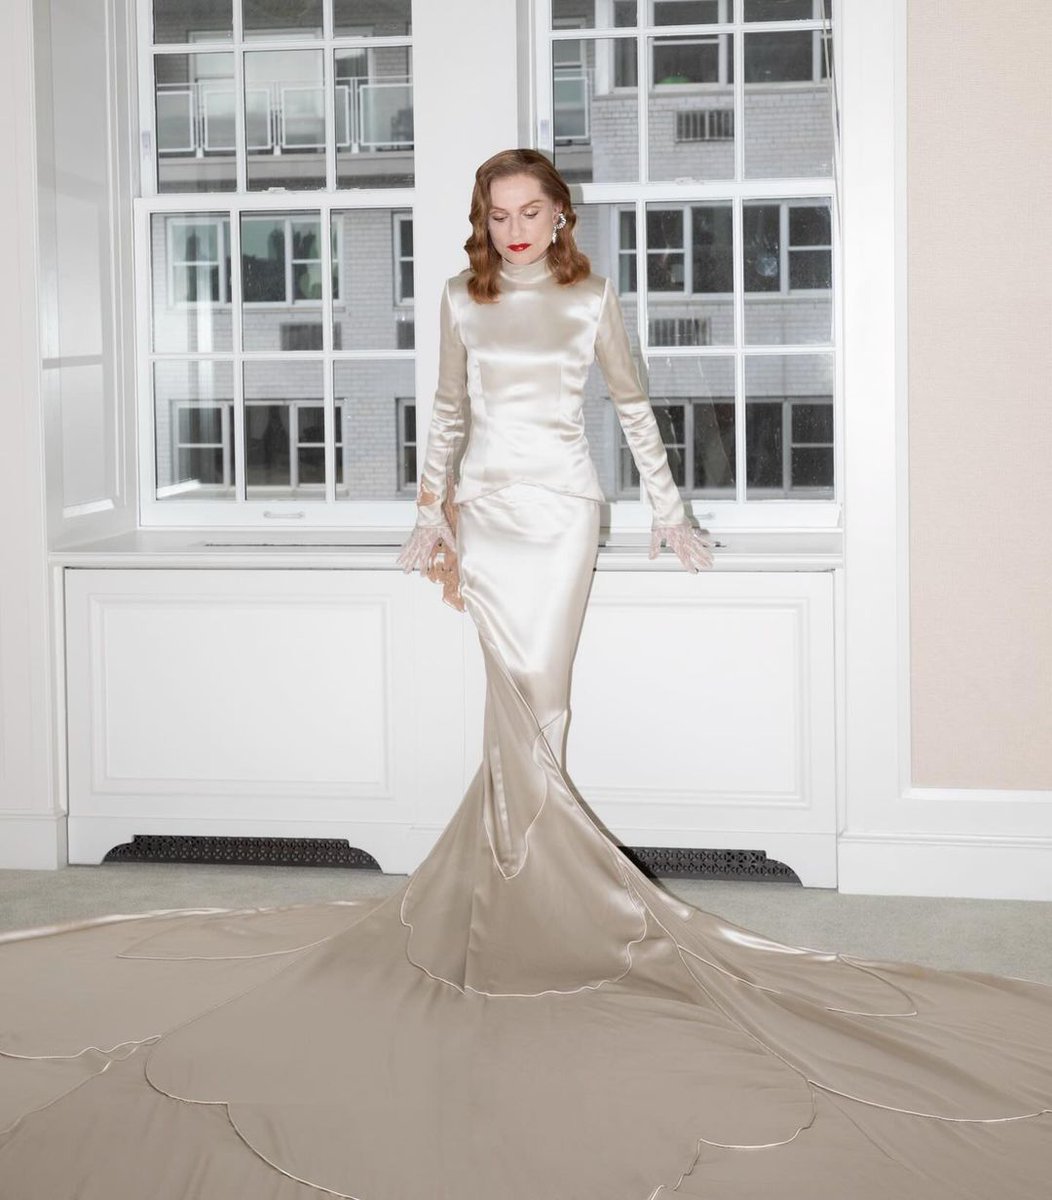 Isabelle Huppert, photographed by Davis Bates📸at The Mark Hotel, wearing a Balenciaga dress strongly evocative of 1930s fashion, based on a wedding gown designed by her ancestors, the Callot Soeurs. #MetGala